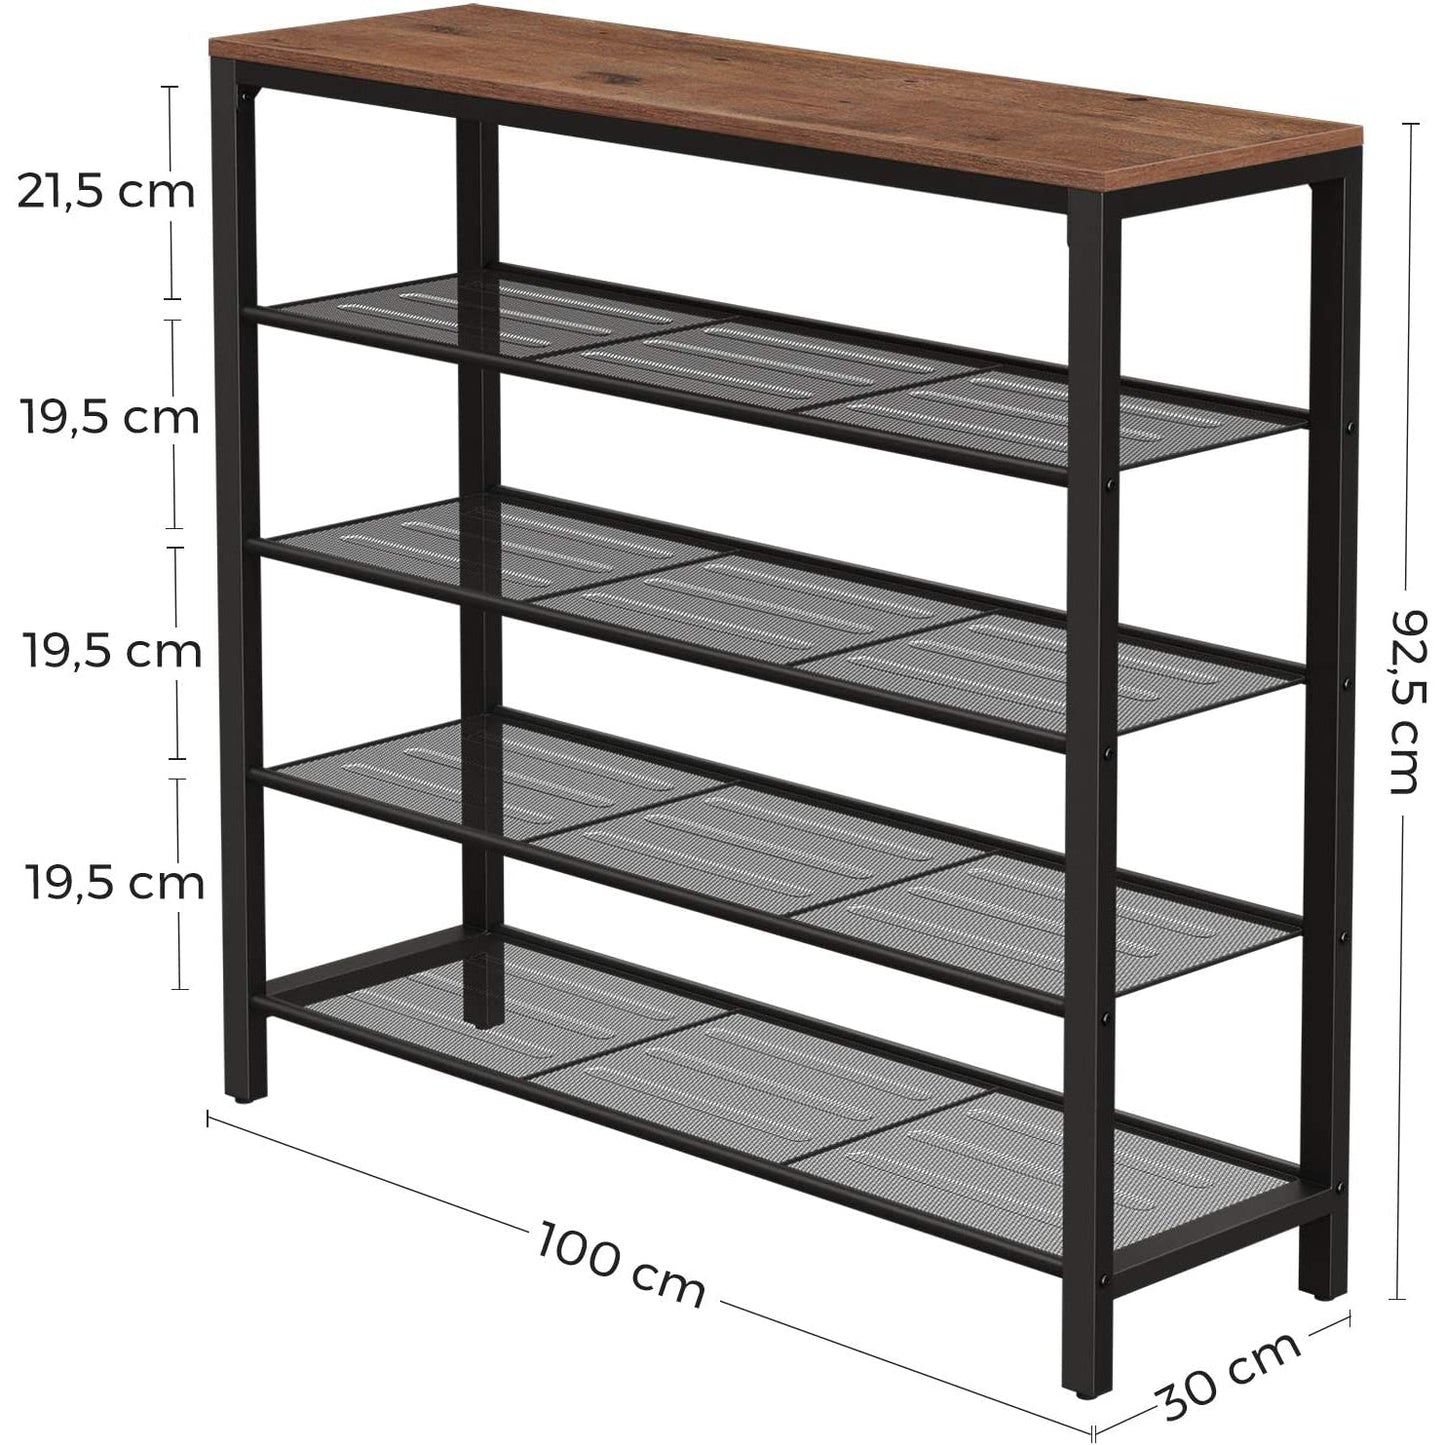 Nancy's Logan Shoe Rack - Shoe Cabinet for 16 Pairs of Shoes - Industrial Vintage Design - Wood and Metal - 100 x 30 x 92.5 cm